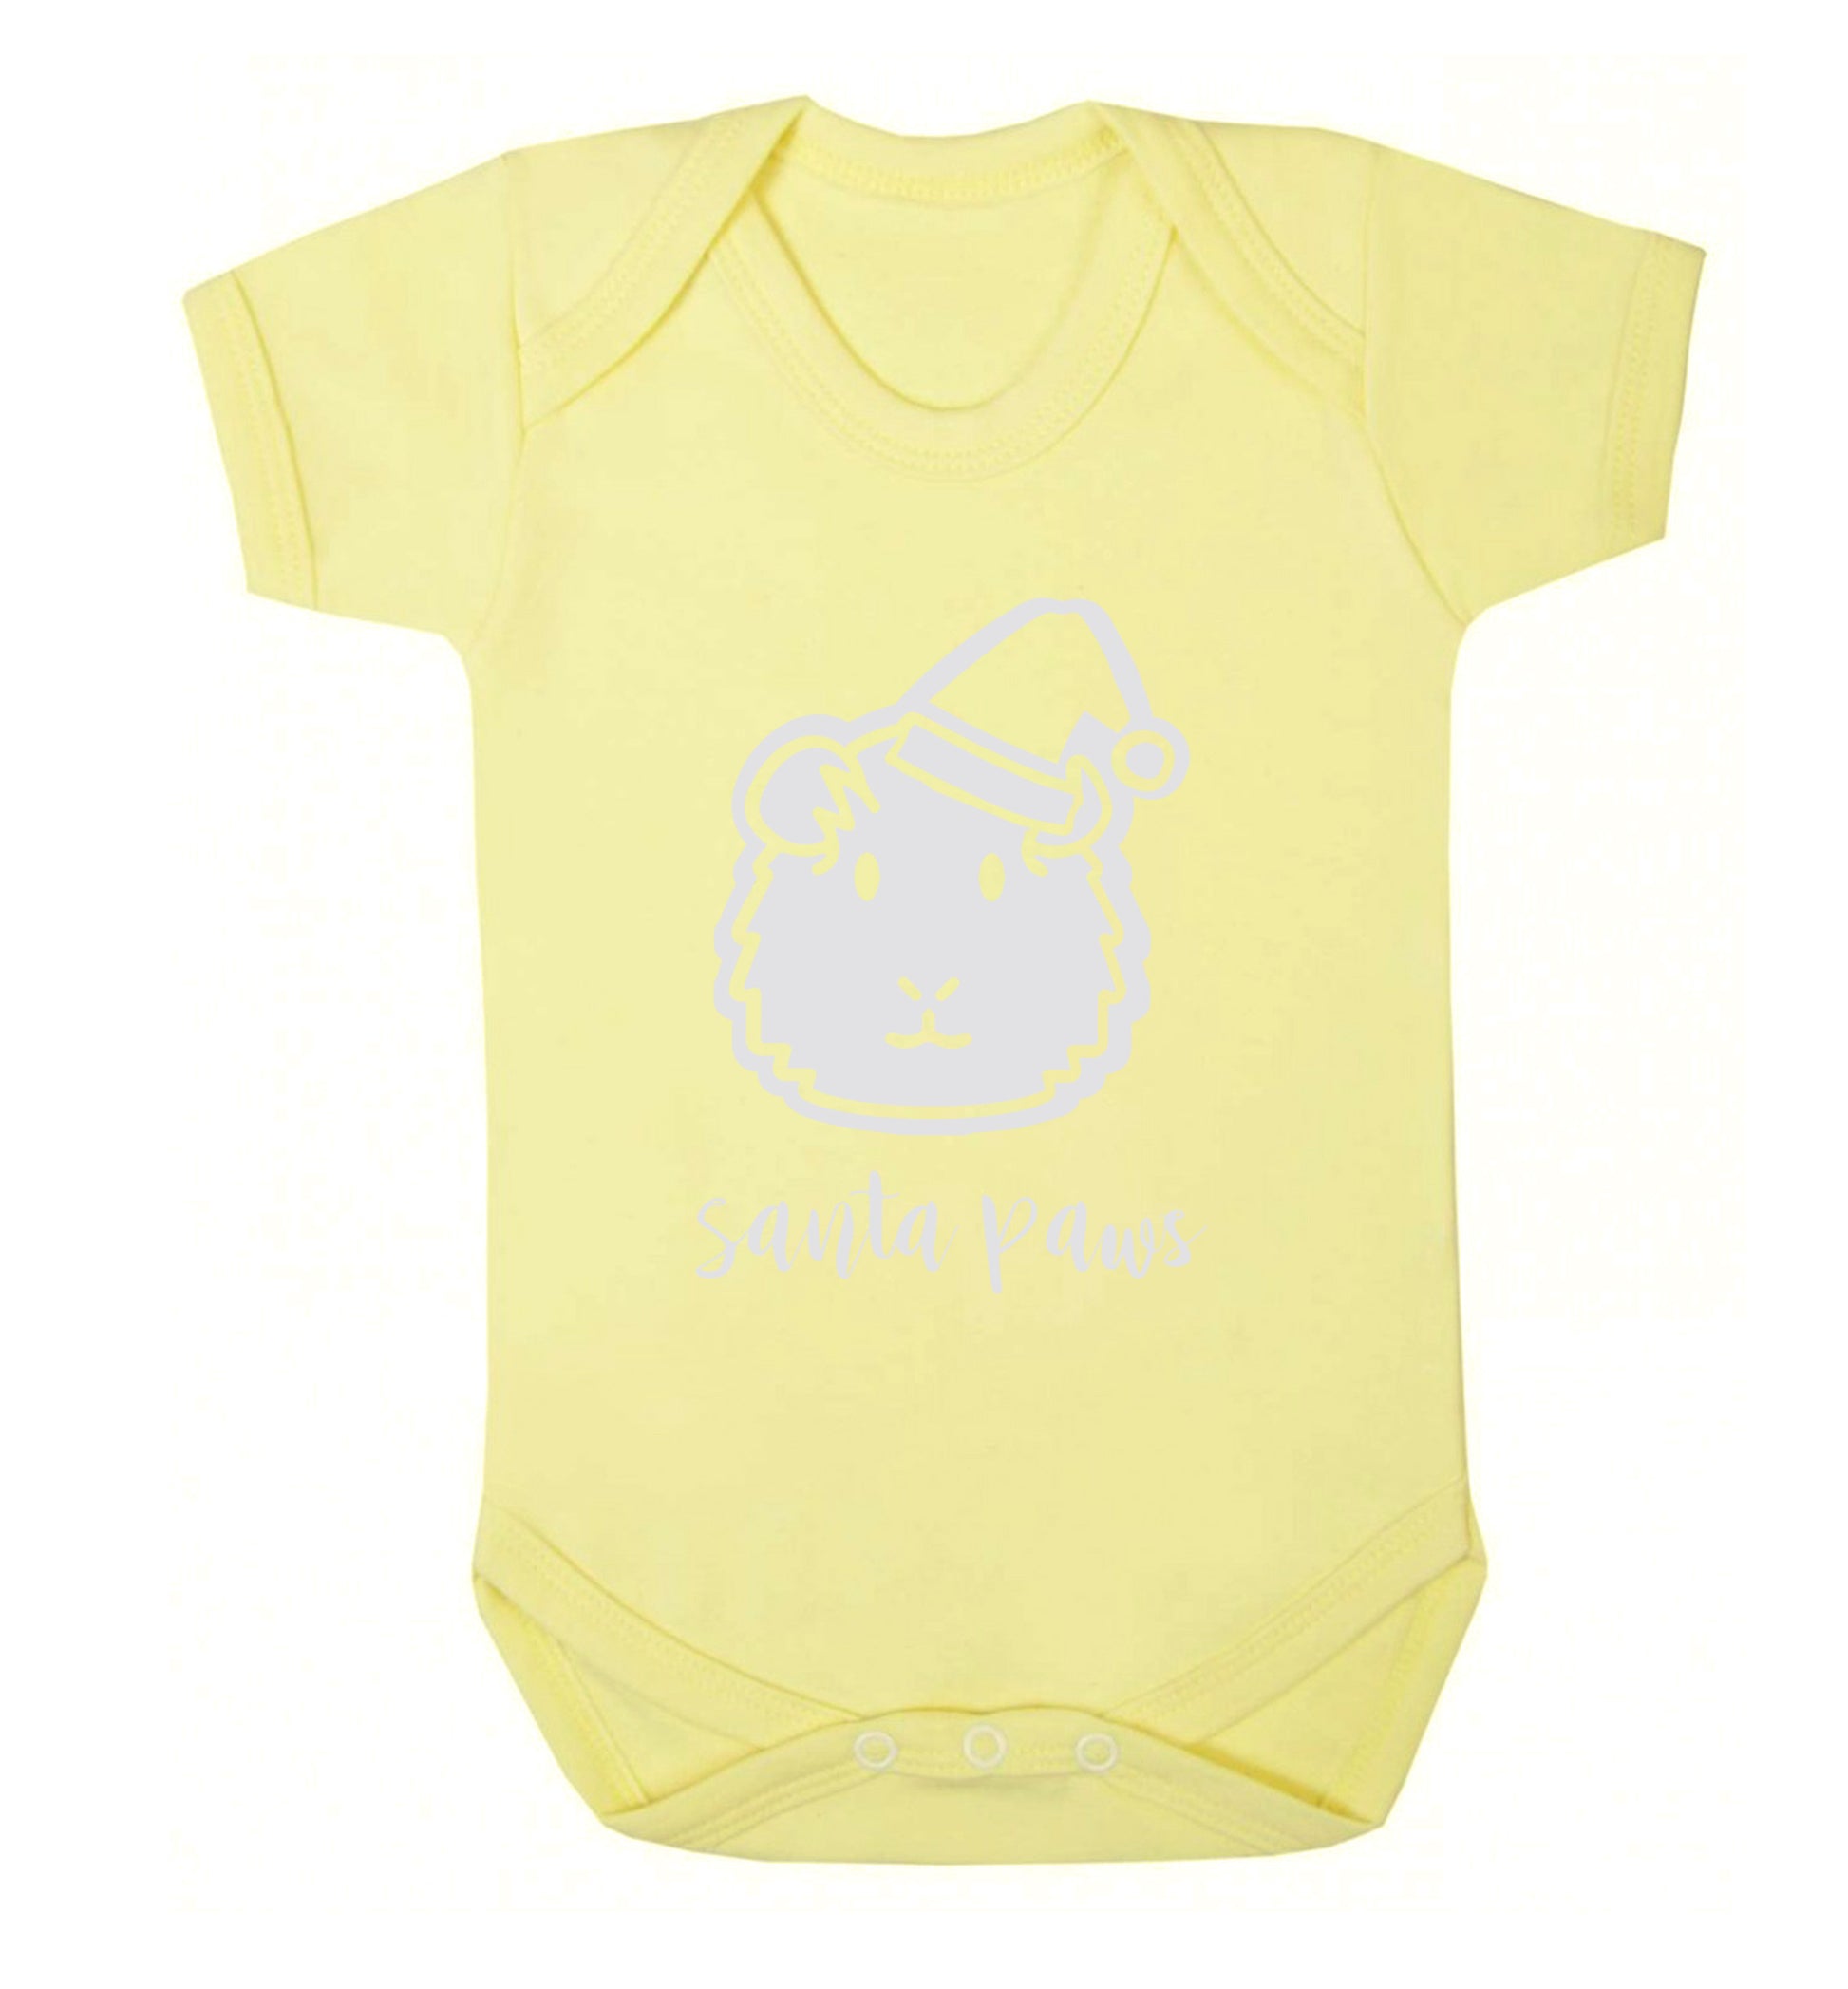 Guinea pig Santa Paws Baby Vest pale yellow 18-24 months